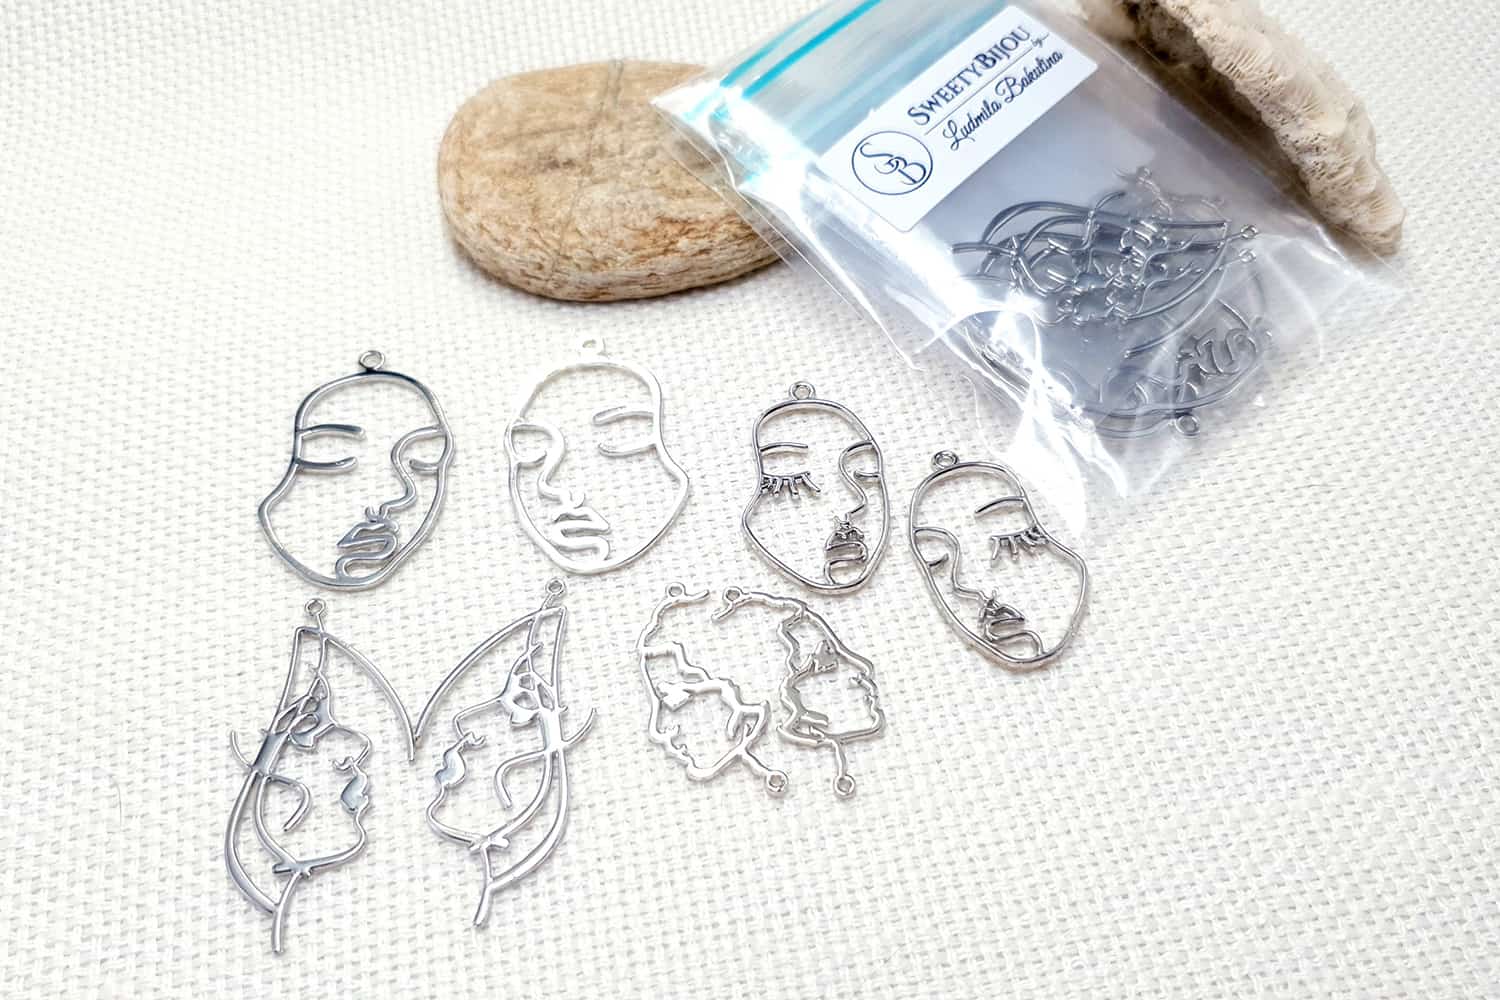 Faces - Set of 8pcs Silver Color Metal Jewelry Findings (22386)